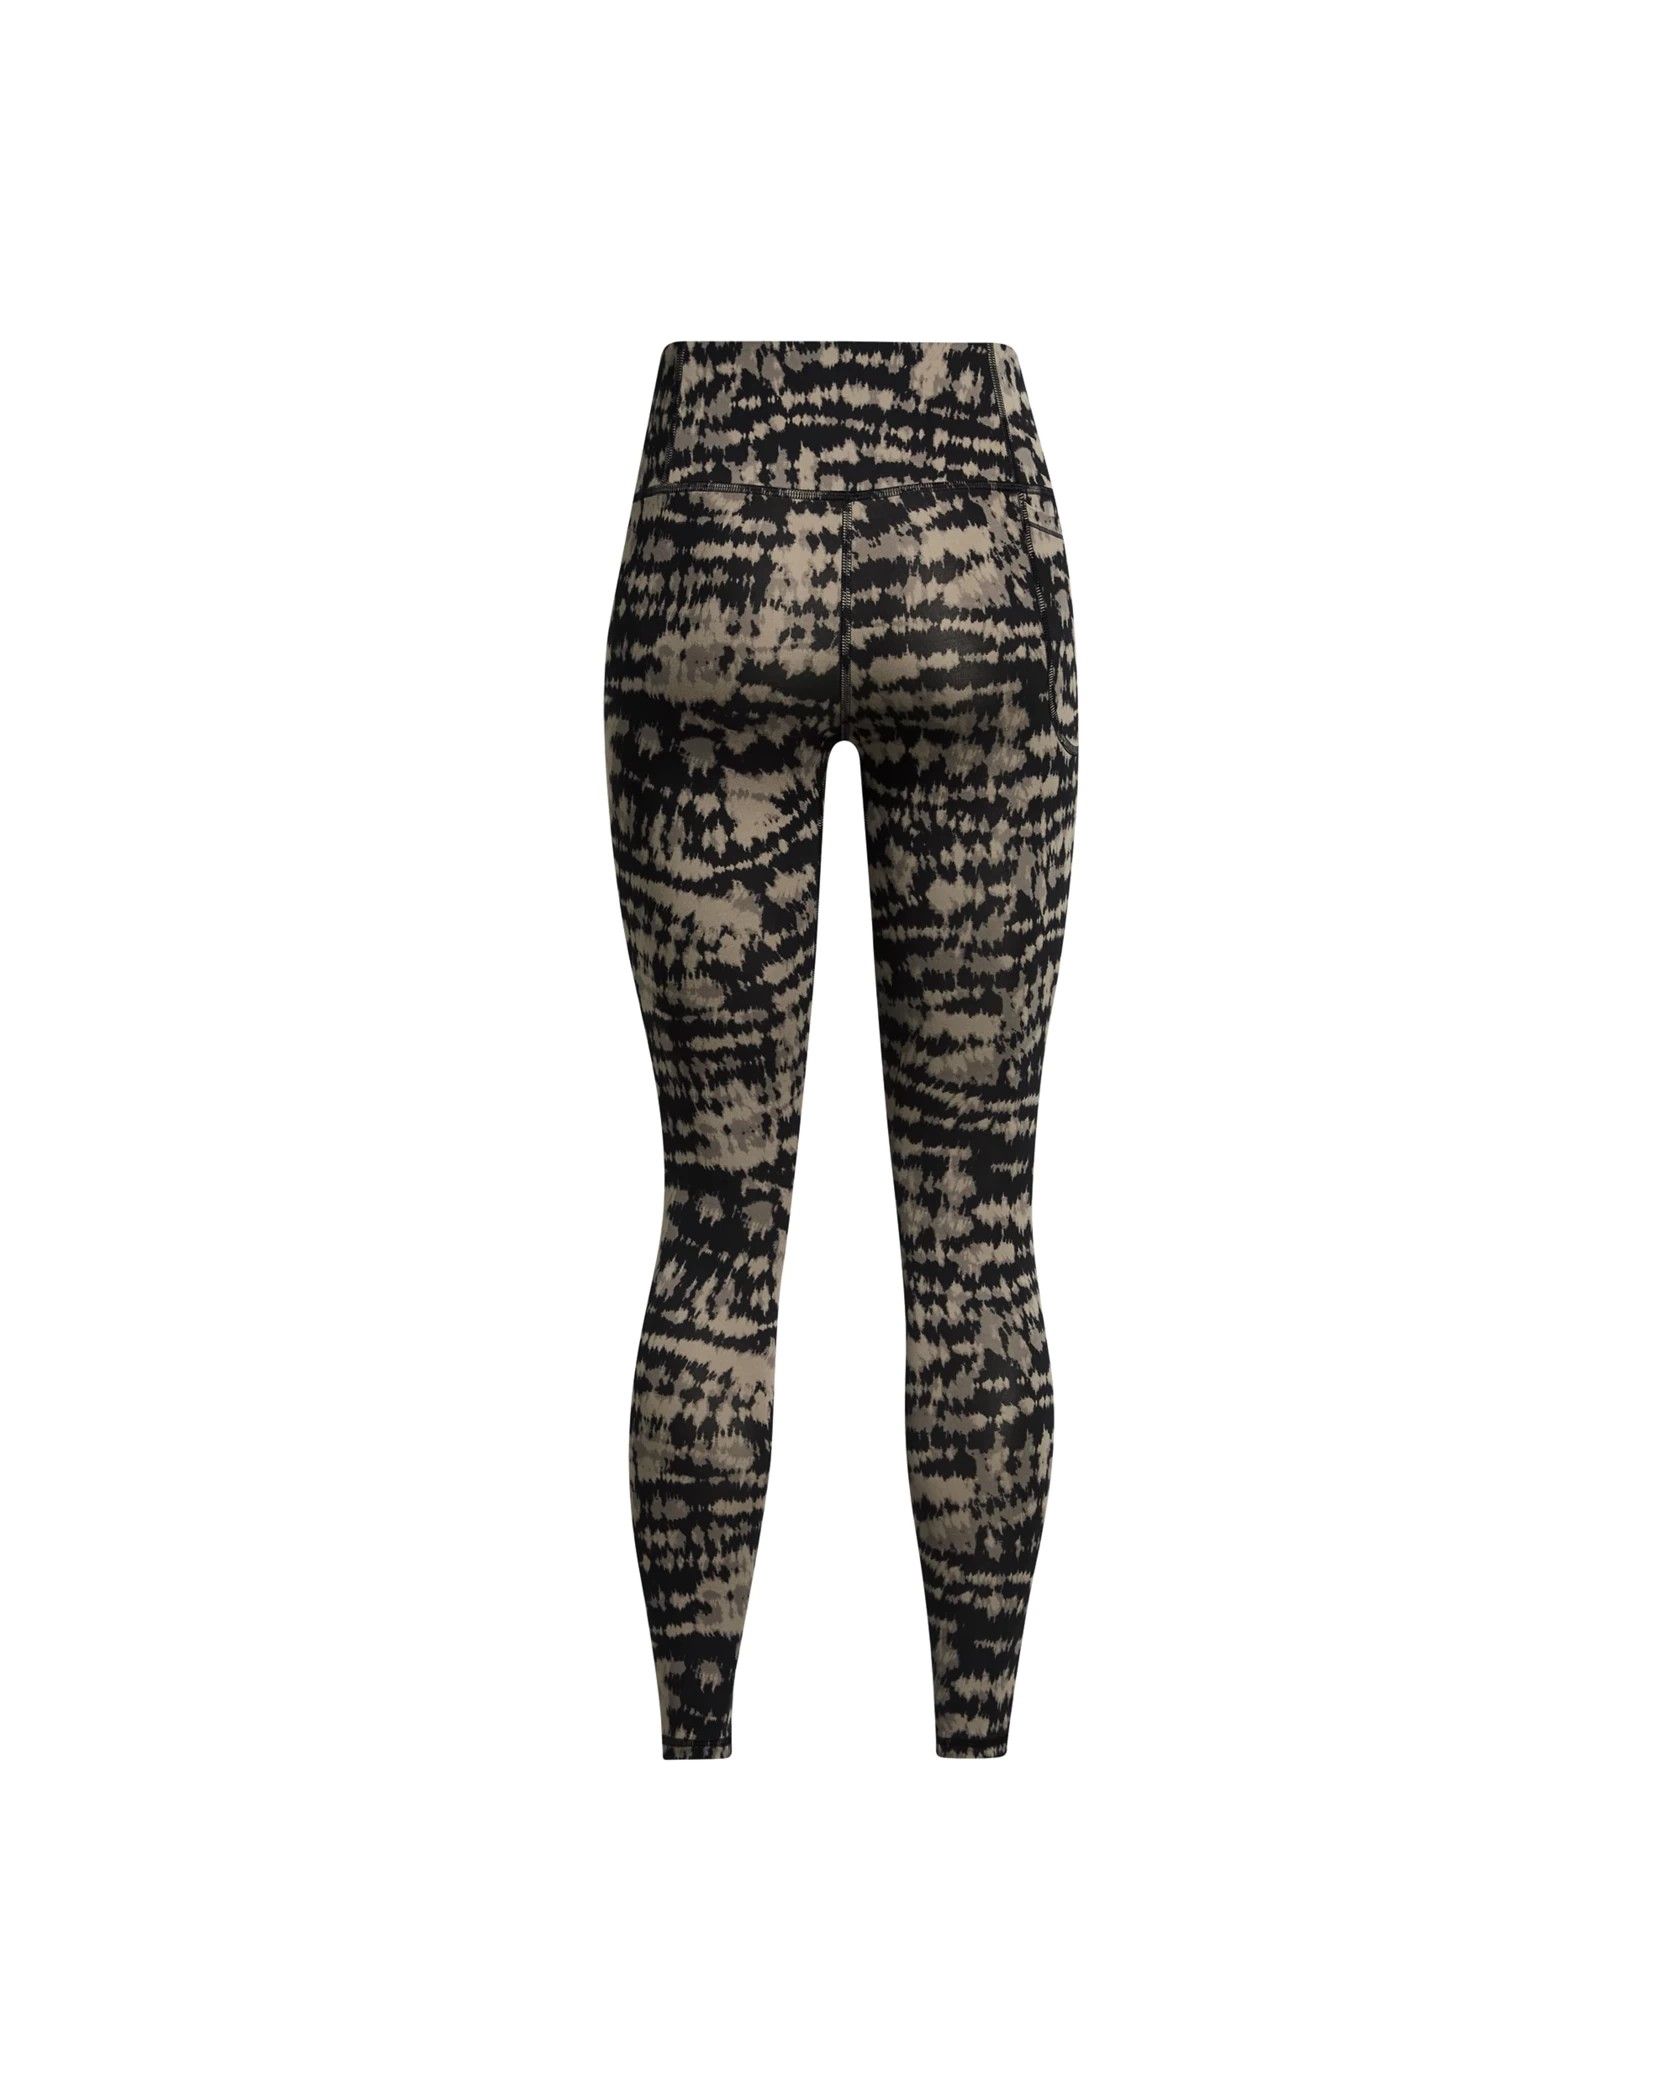 Under Armour Women's UA Perfect Printed Zipped Fitted Leggings XL 